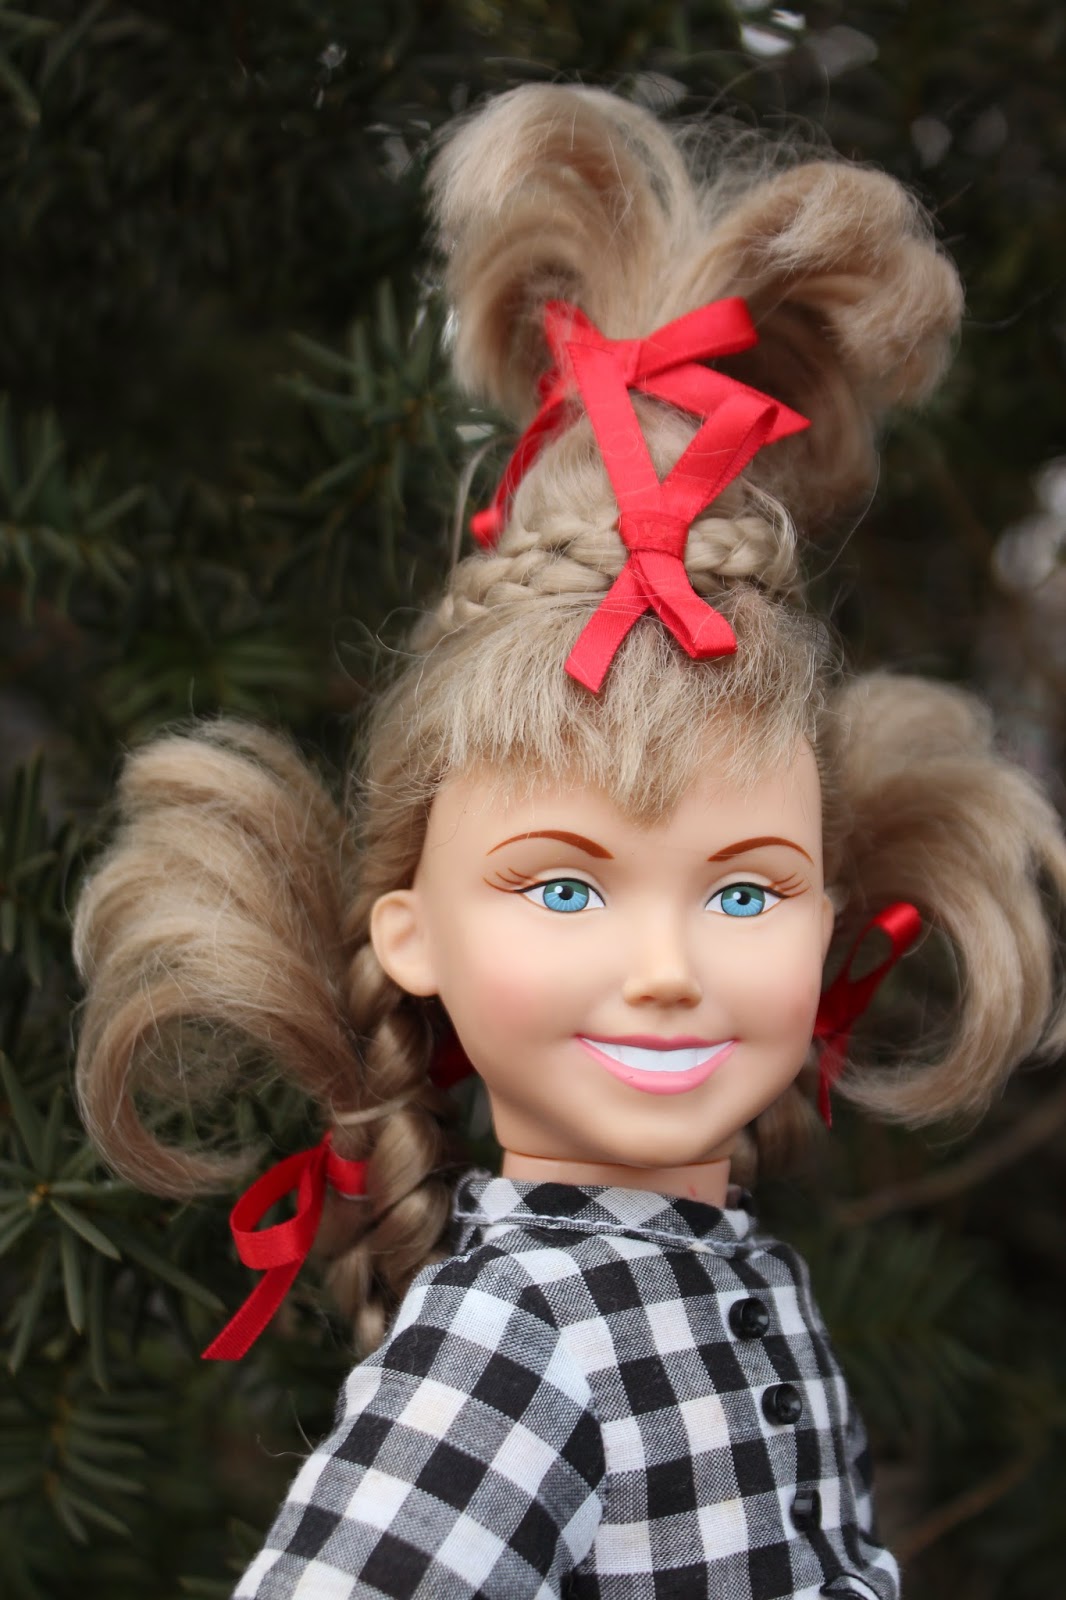 Some of the dolls were made to look like the illustrations of Cindy Lou Who...